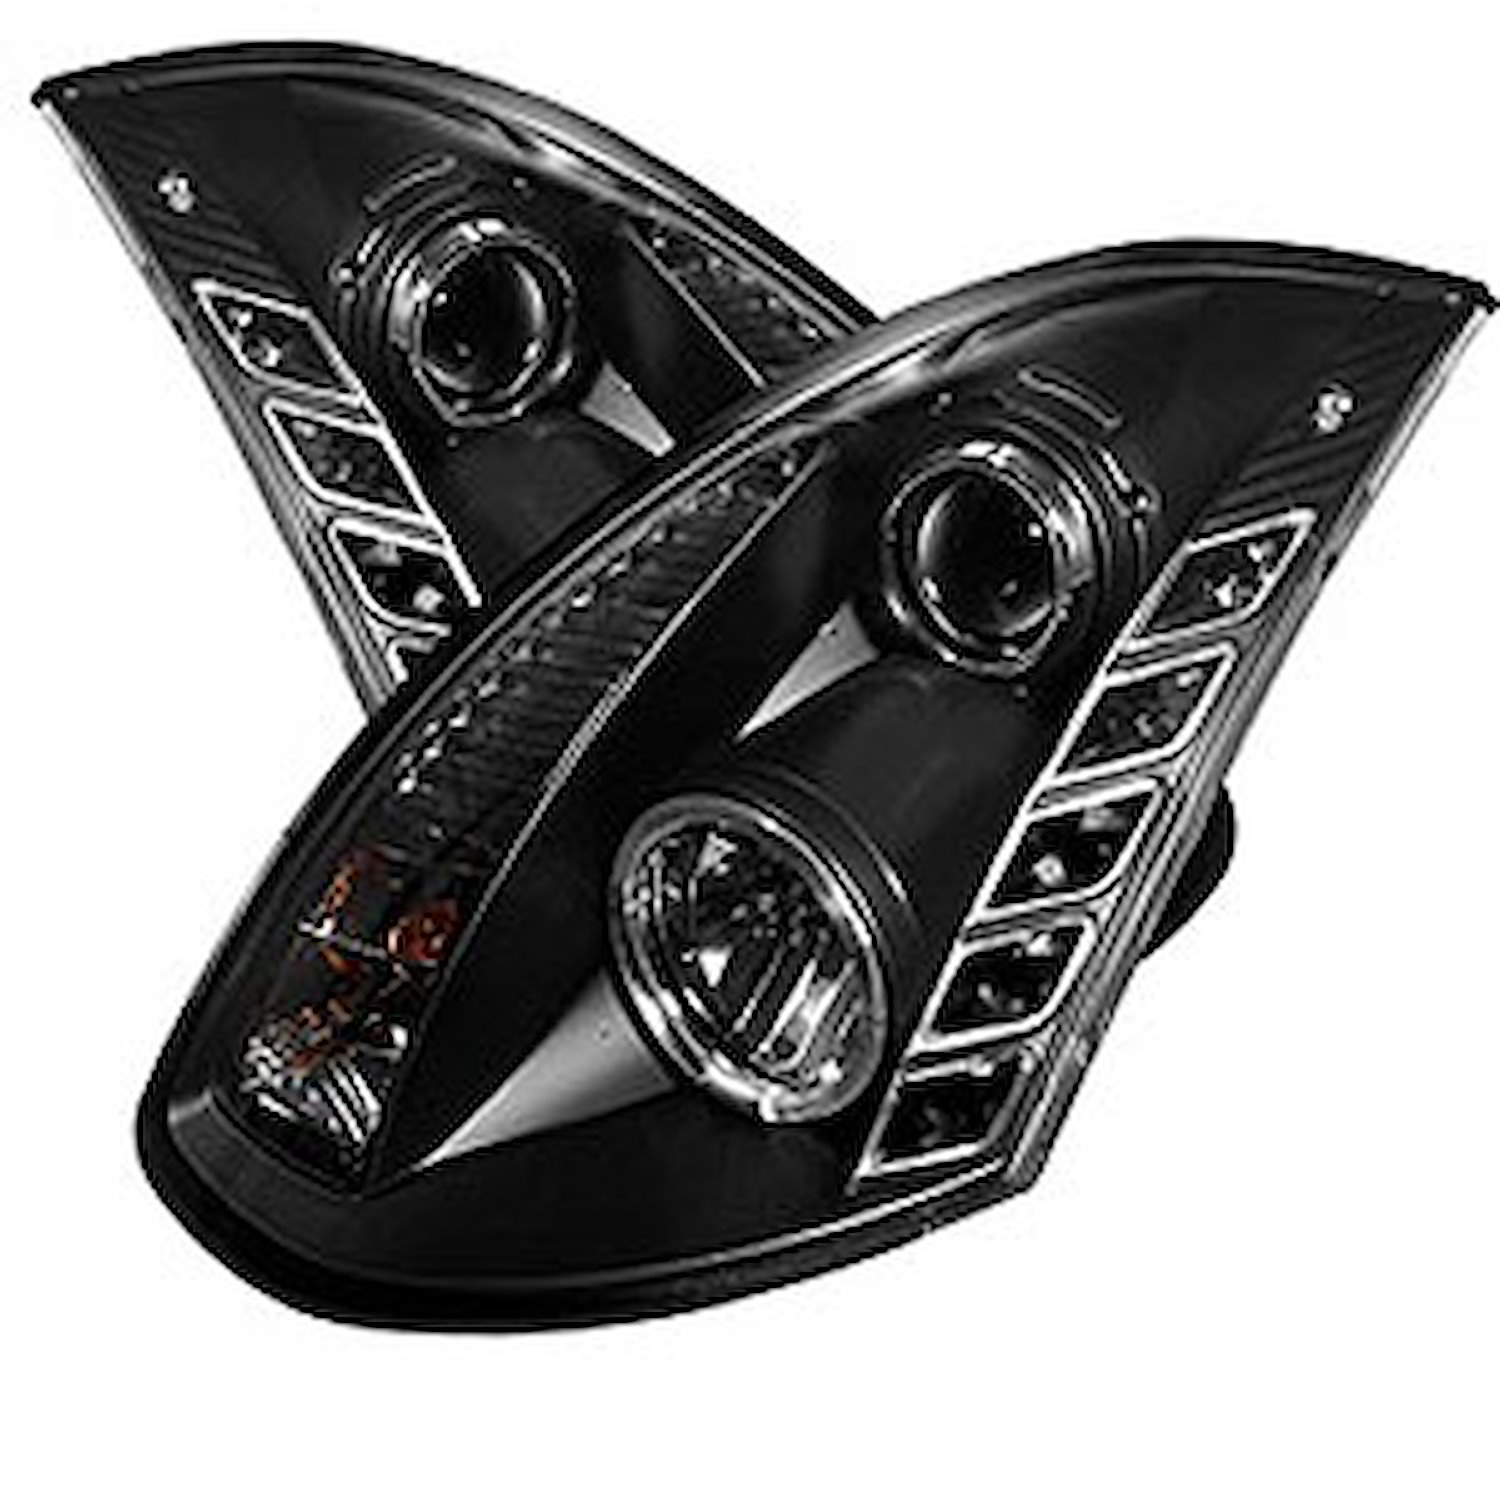 Halo DRL Projector Headlights 2003-2007 for Infiniti G35